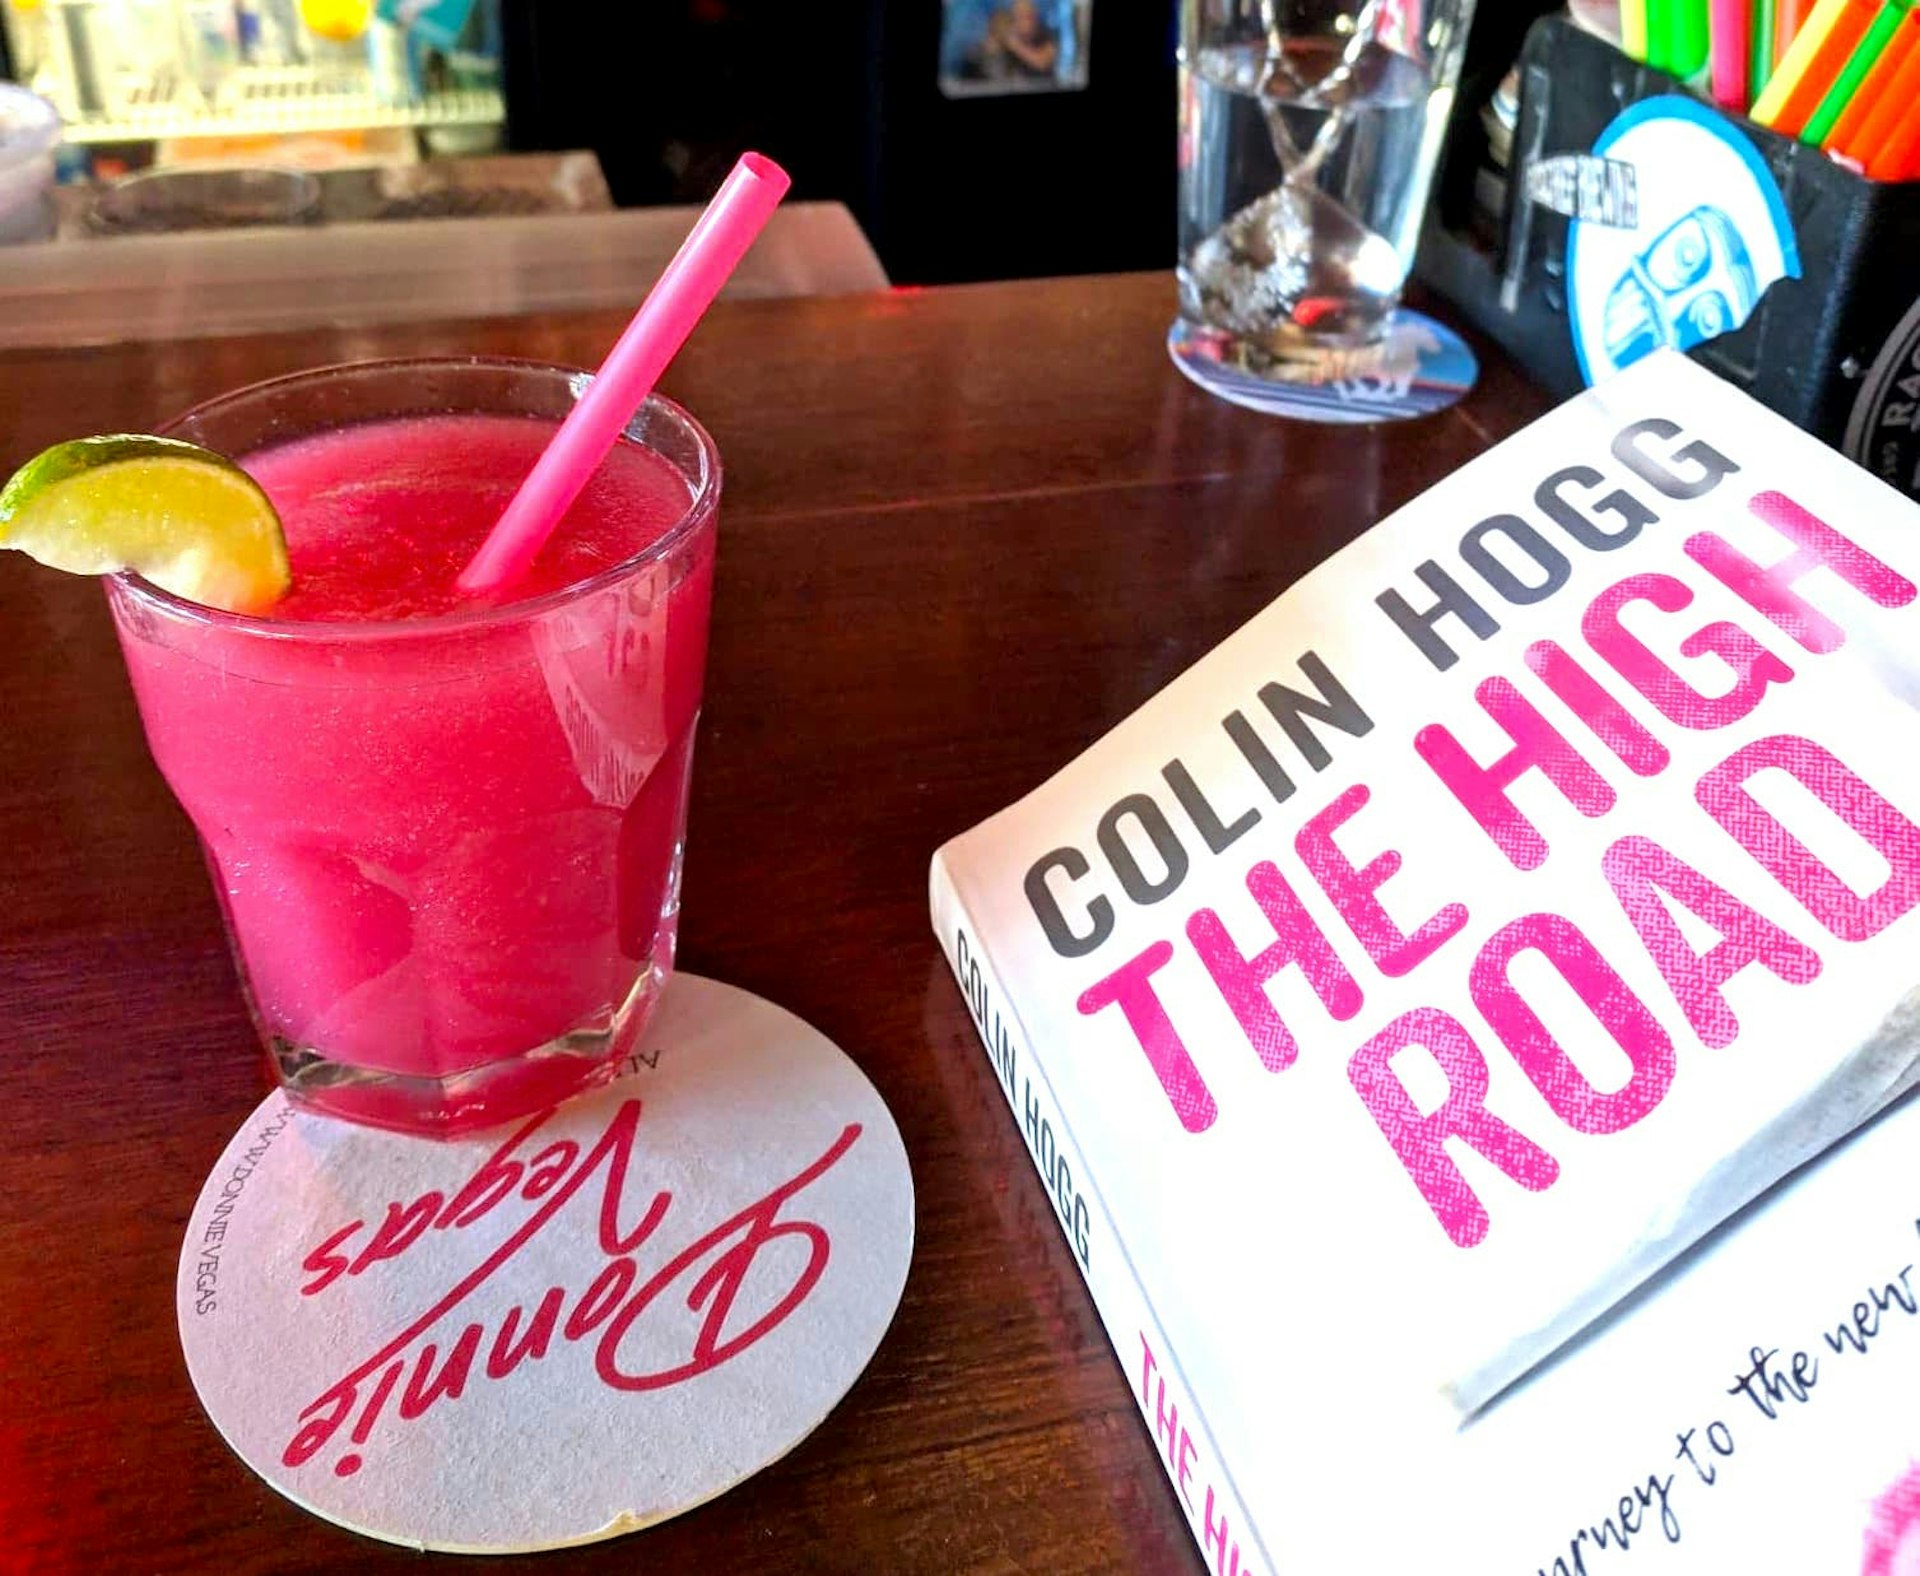 A hot pink cocktail garnished with a lime and with an equally pink plastic straw sits in a highball glass on a coaster reading Donnie Vegas upside down in a fluorescent cursive script. On the right side of the frame is a paperback book by Colin Hogg entitled "The High Road" in a matching pink font 